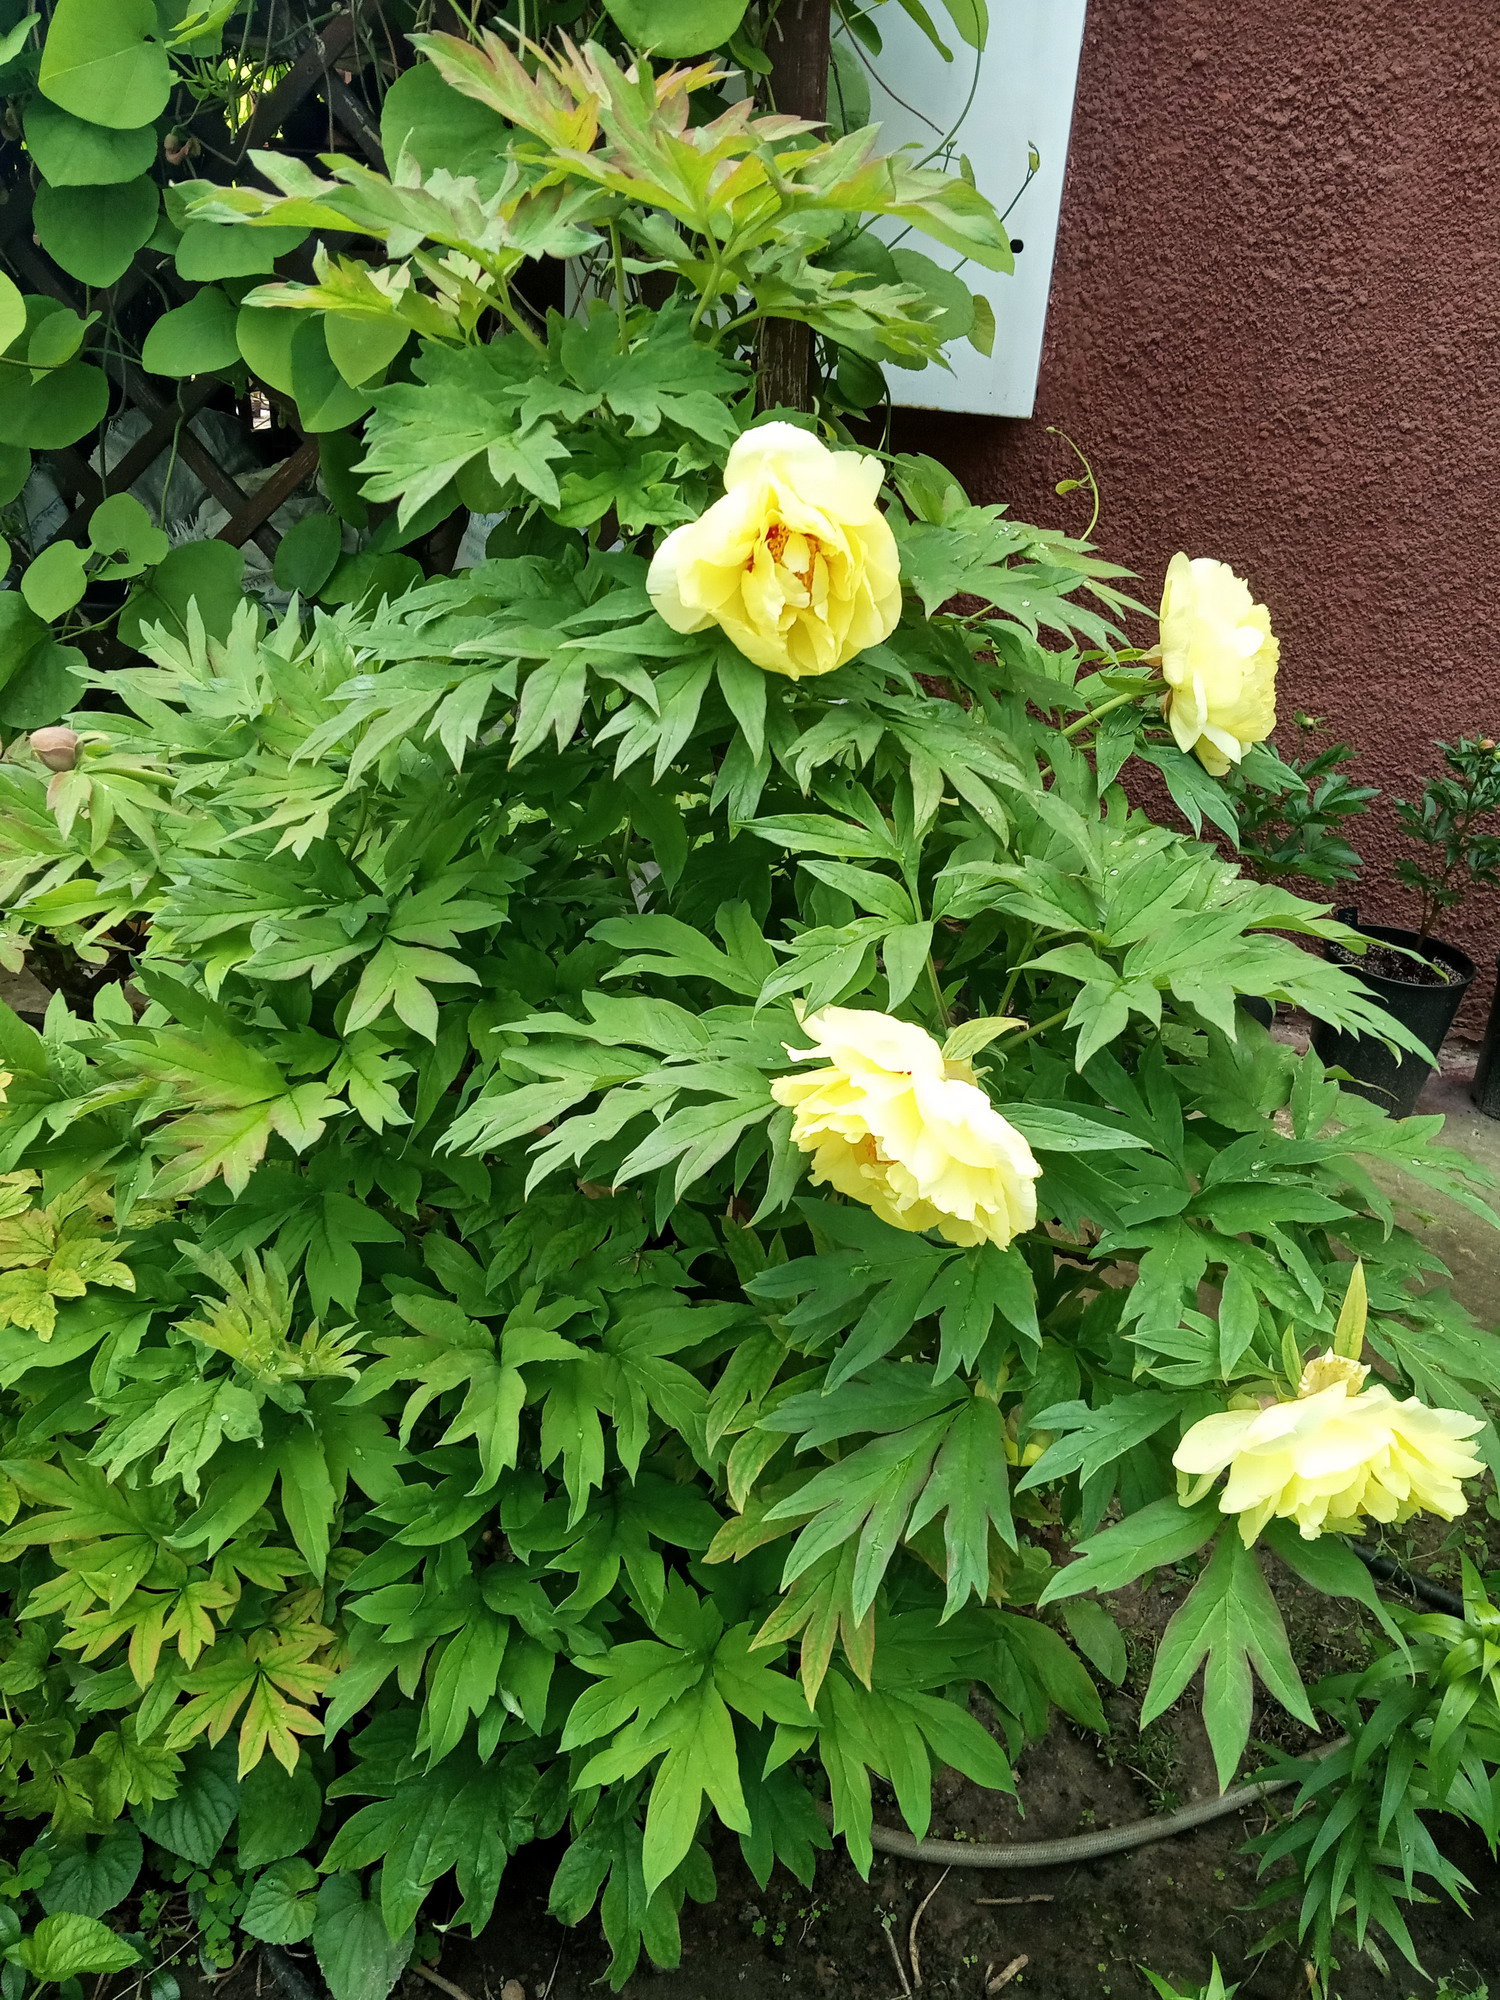 What do our peonies look like on the client's site